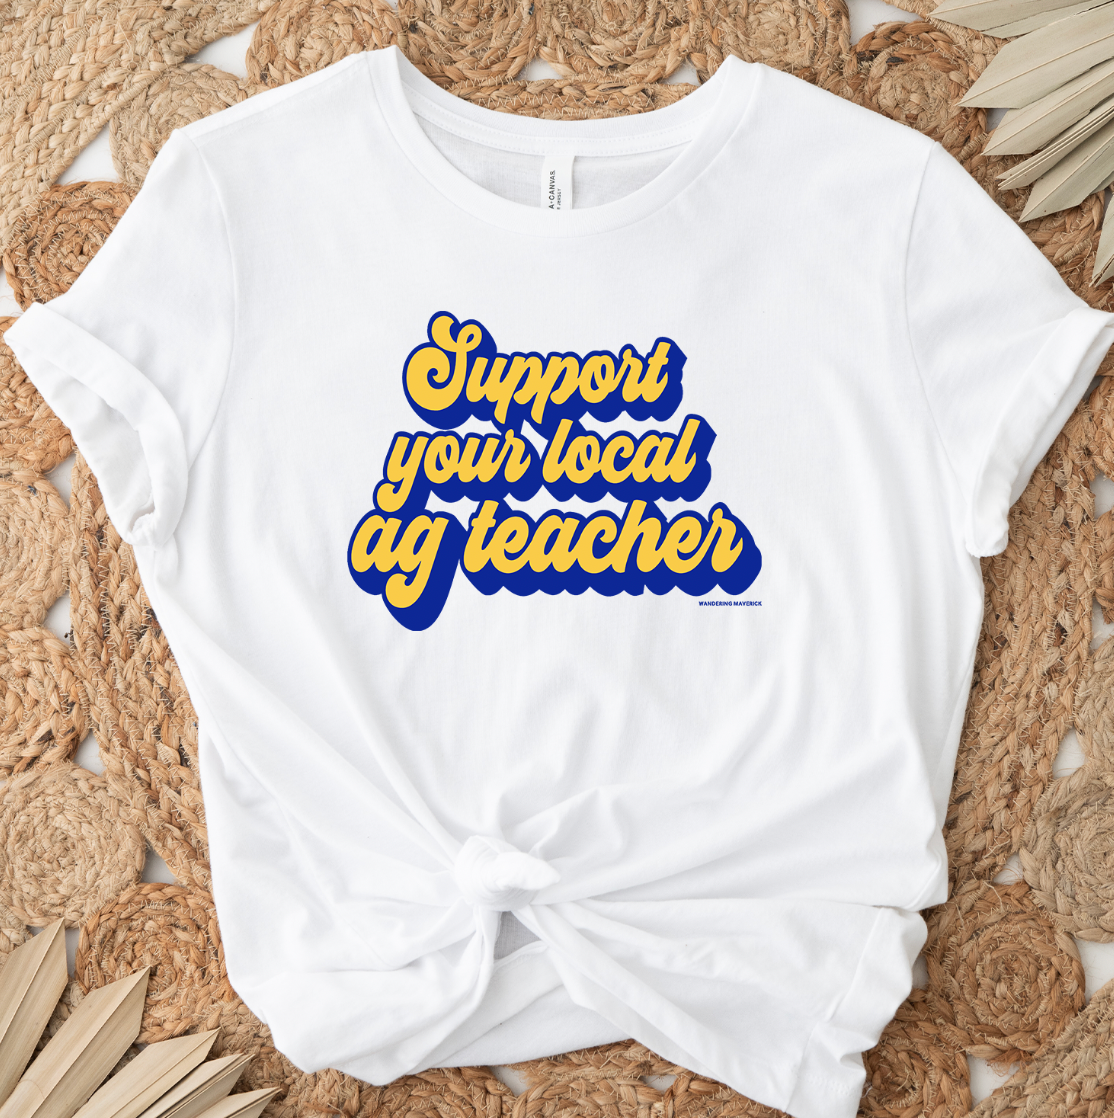 Retro Support Your Local AG Teacher FFA Color T-Shirt (XS-4XL) - Multiple Colors!